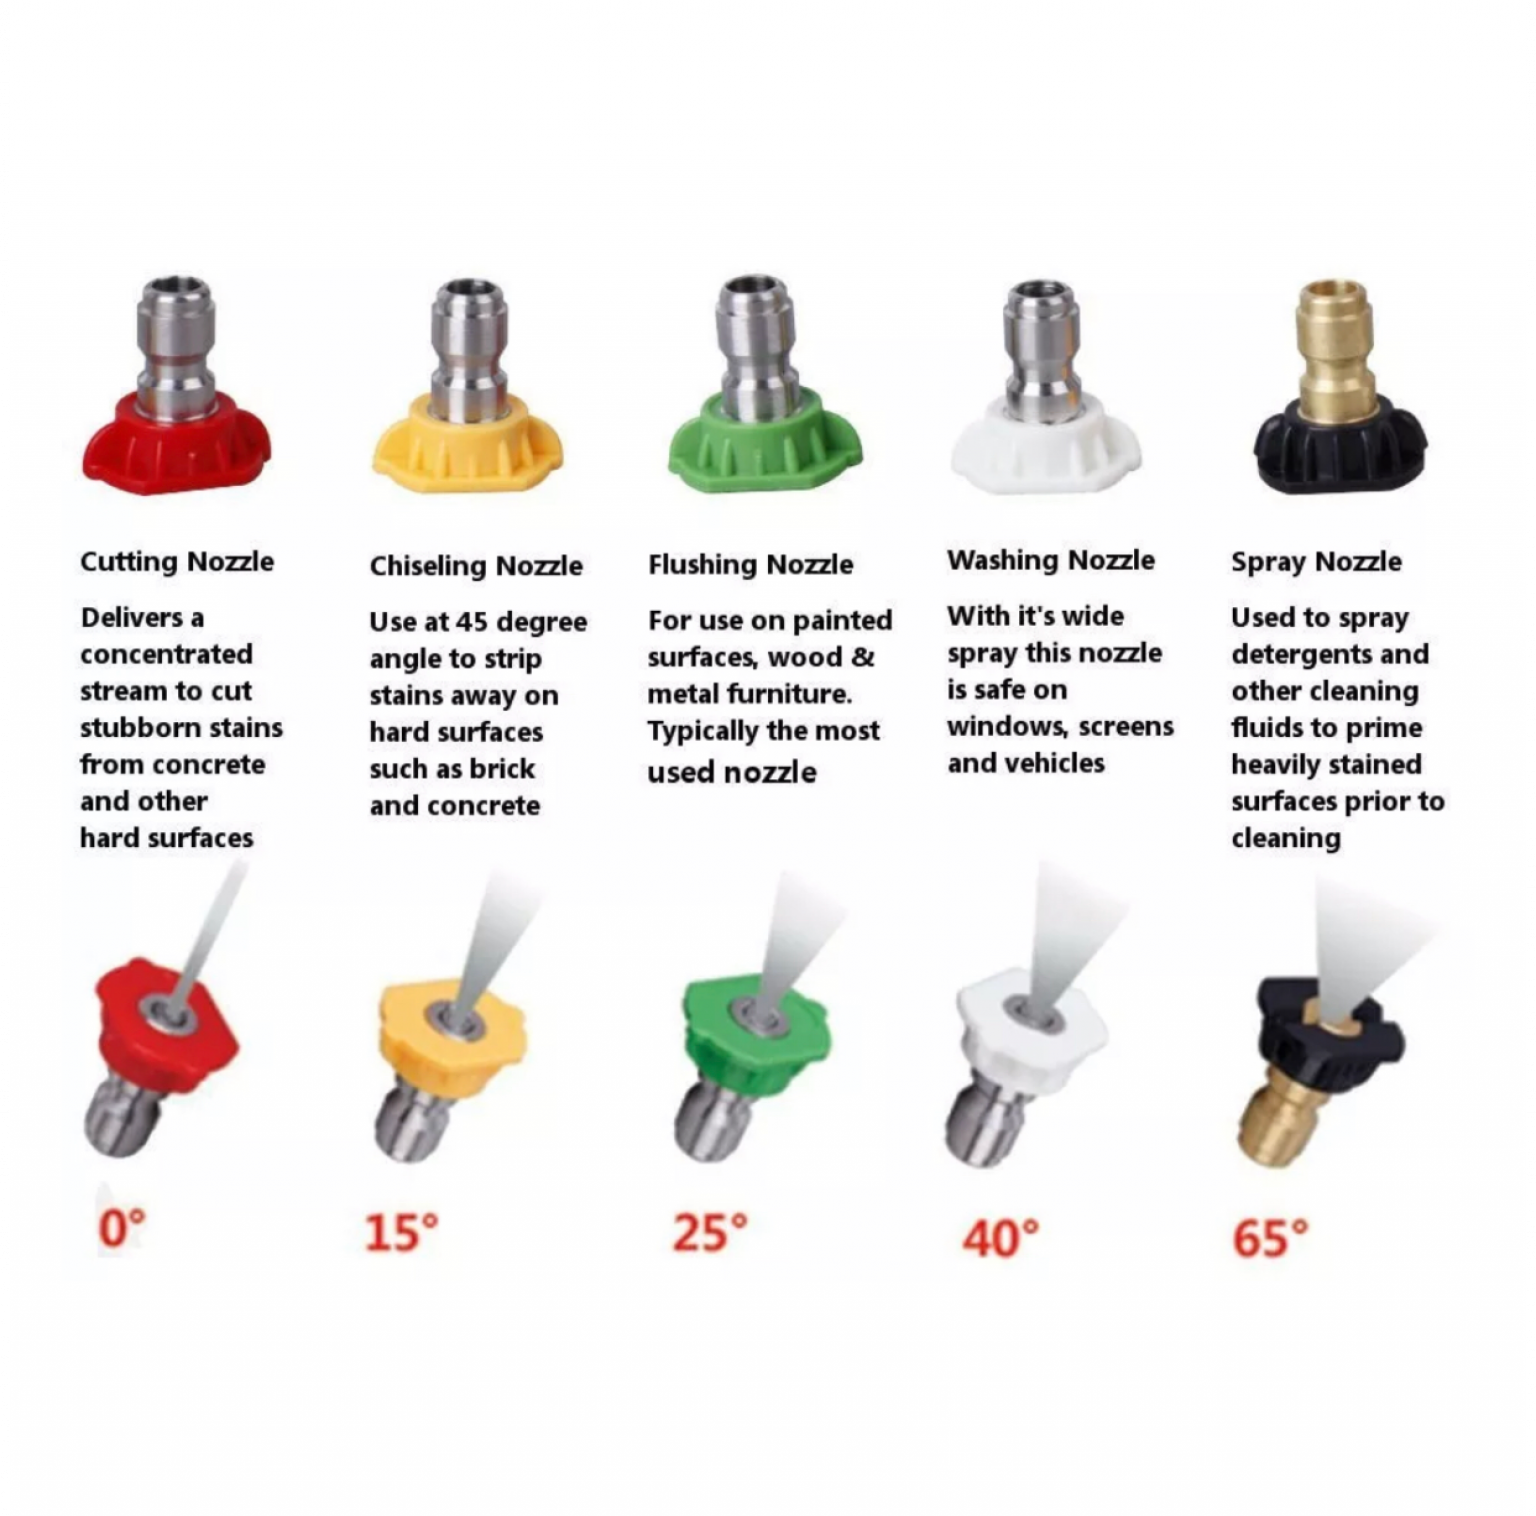 A Simple Reference Guide for Effective Cleaning use a Pressure Nozzle